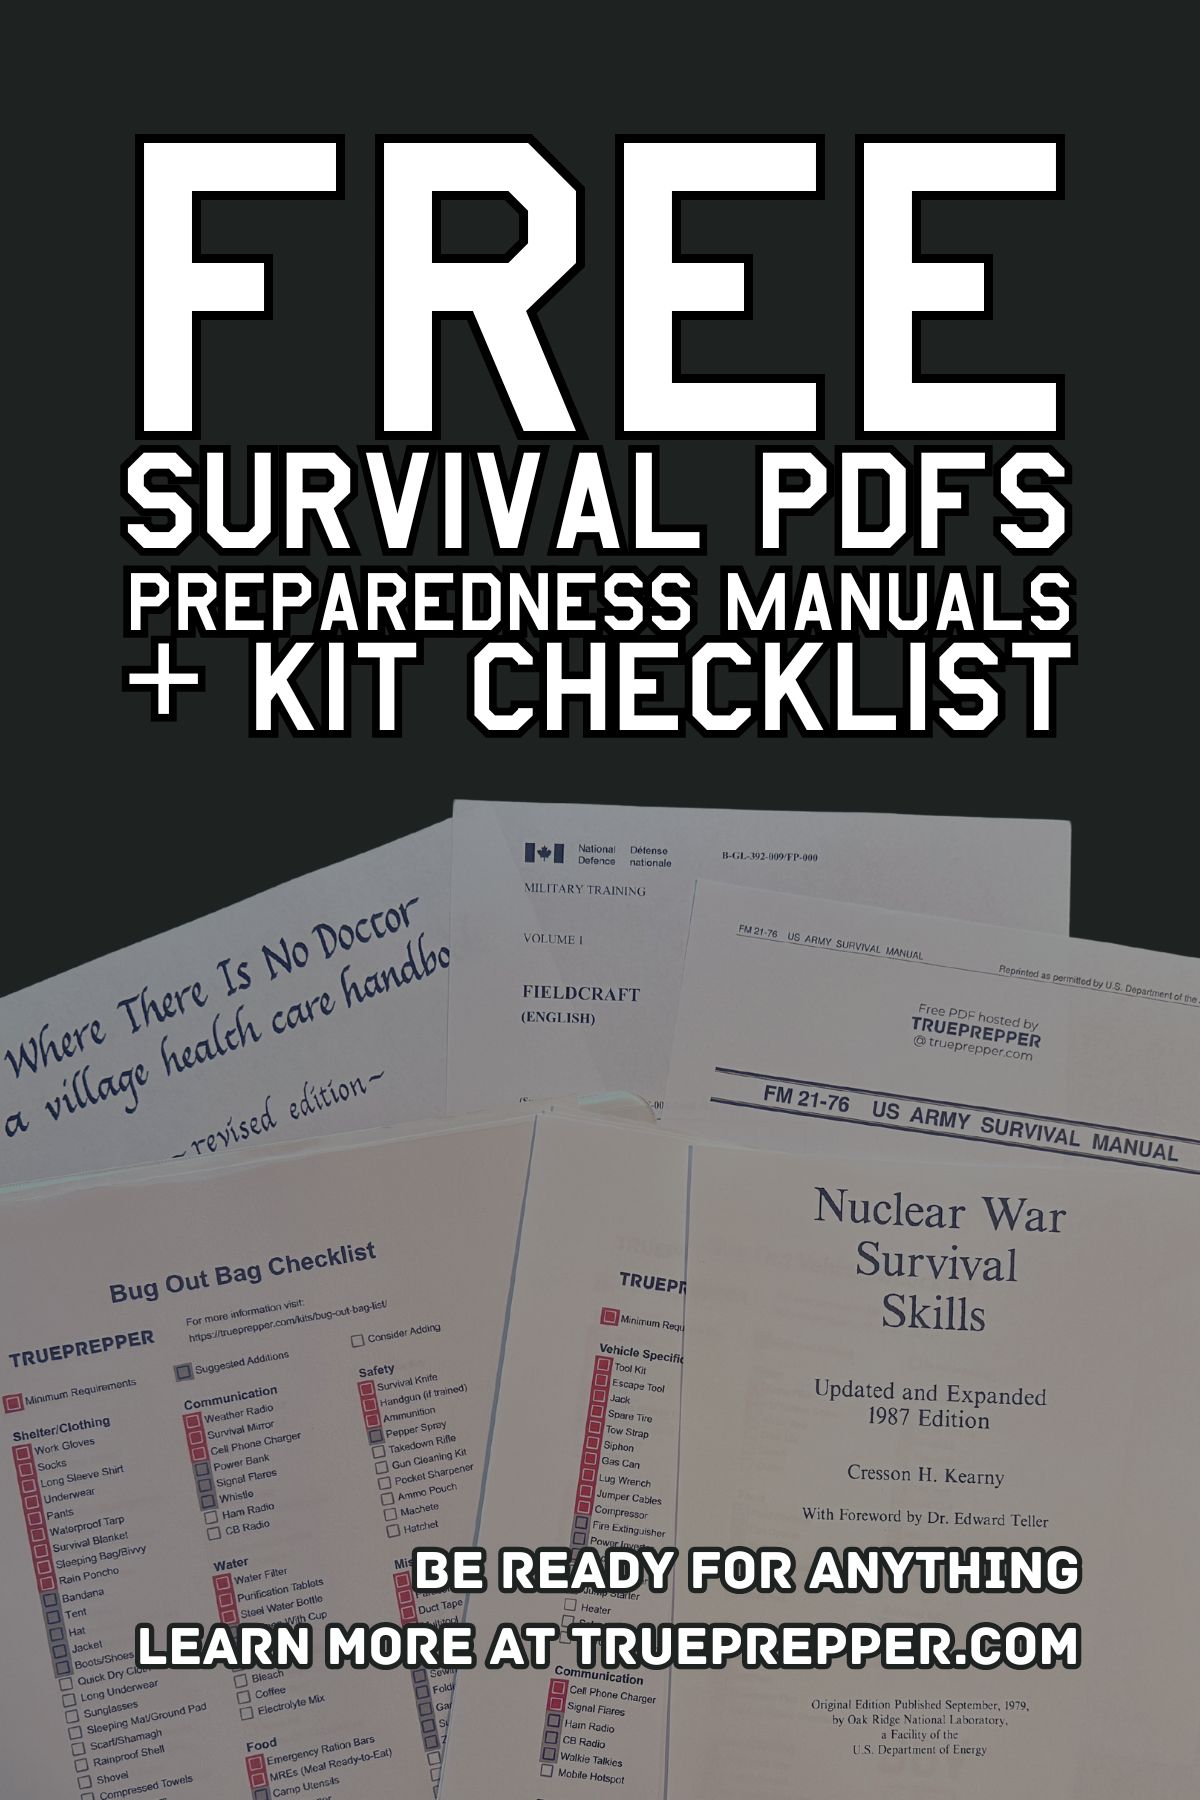 Free Survival PDFs, Preparedness Manuals, and Kit Checklists